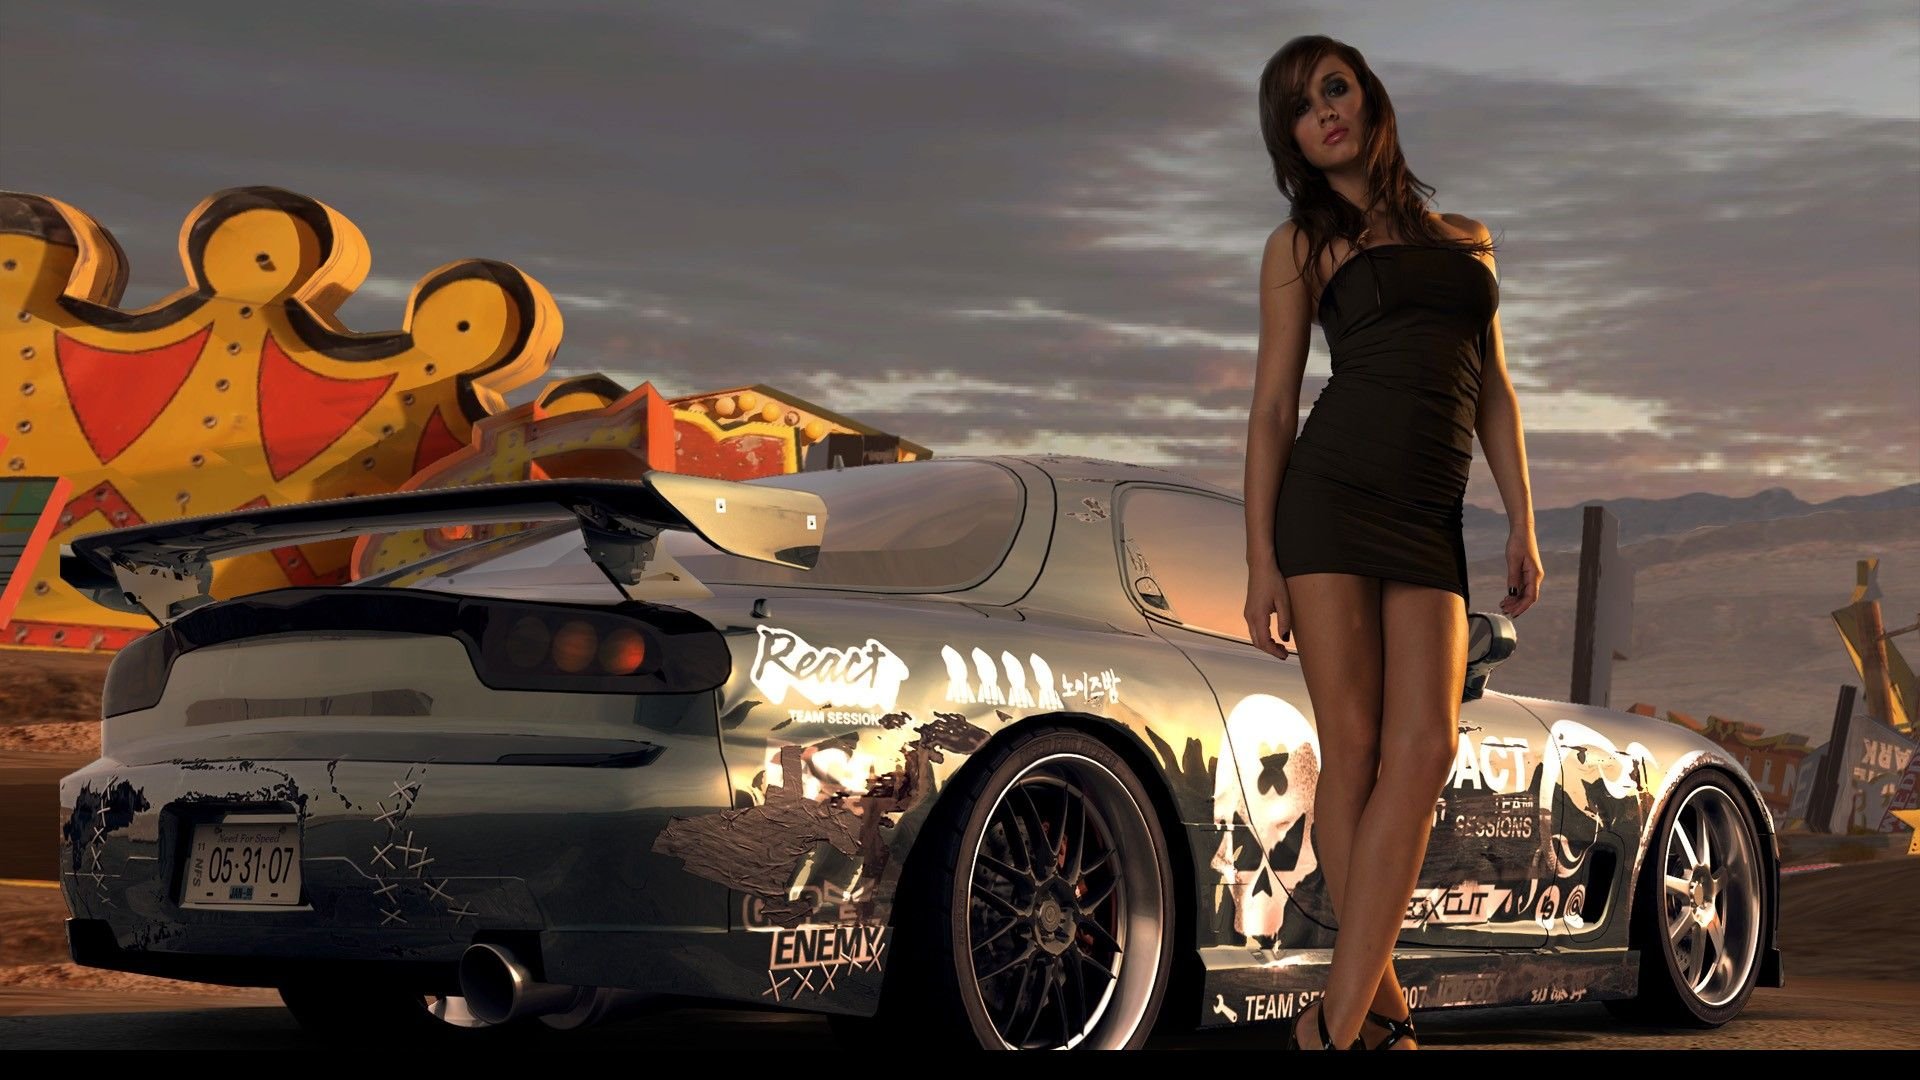 12 Need For Speed Prostreet Hd Wallpapers Background Images Images, Photos, Reviews